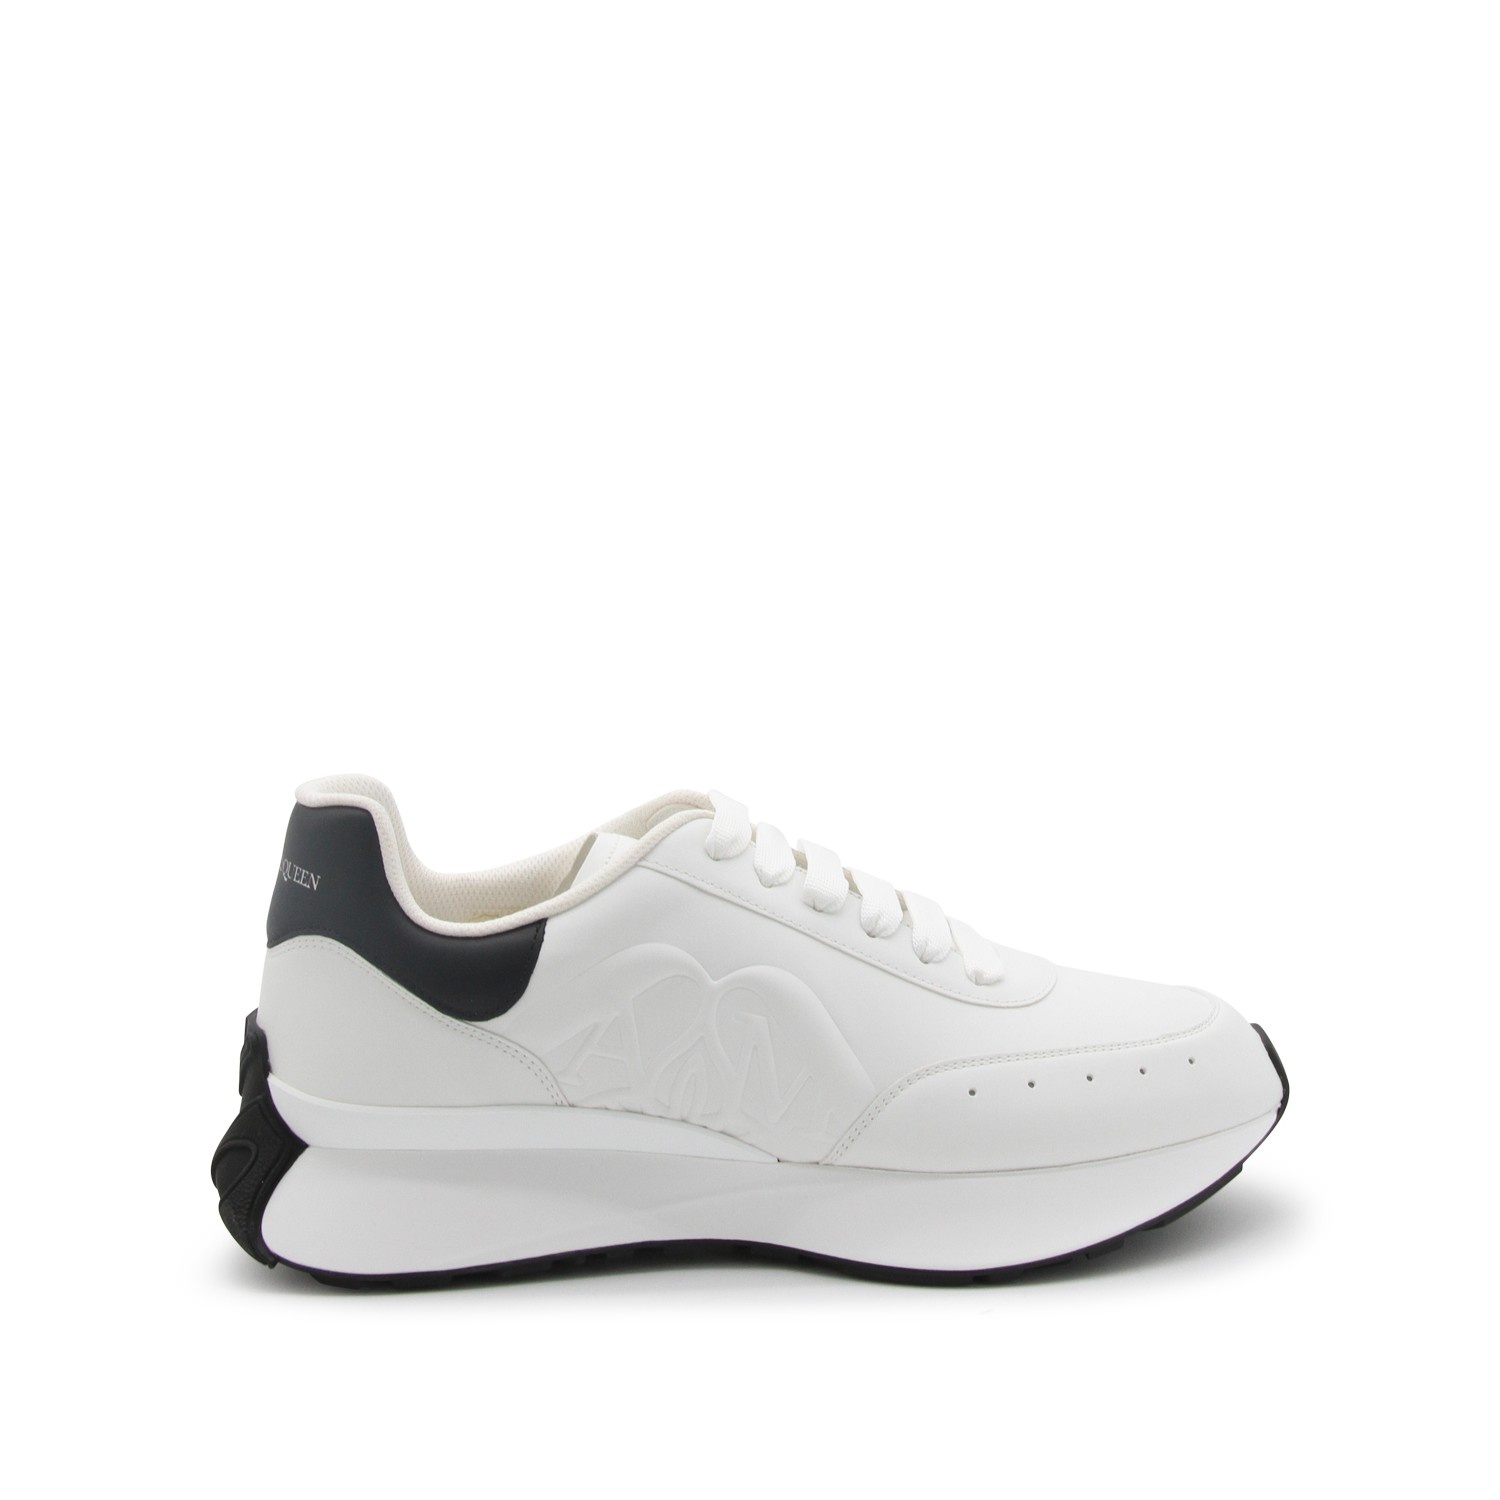 WHITE AND BLACK LEATHER SPRINT SNEAKERS - 1